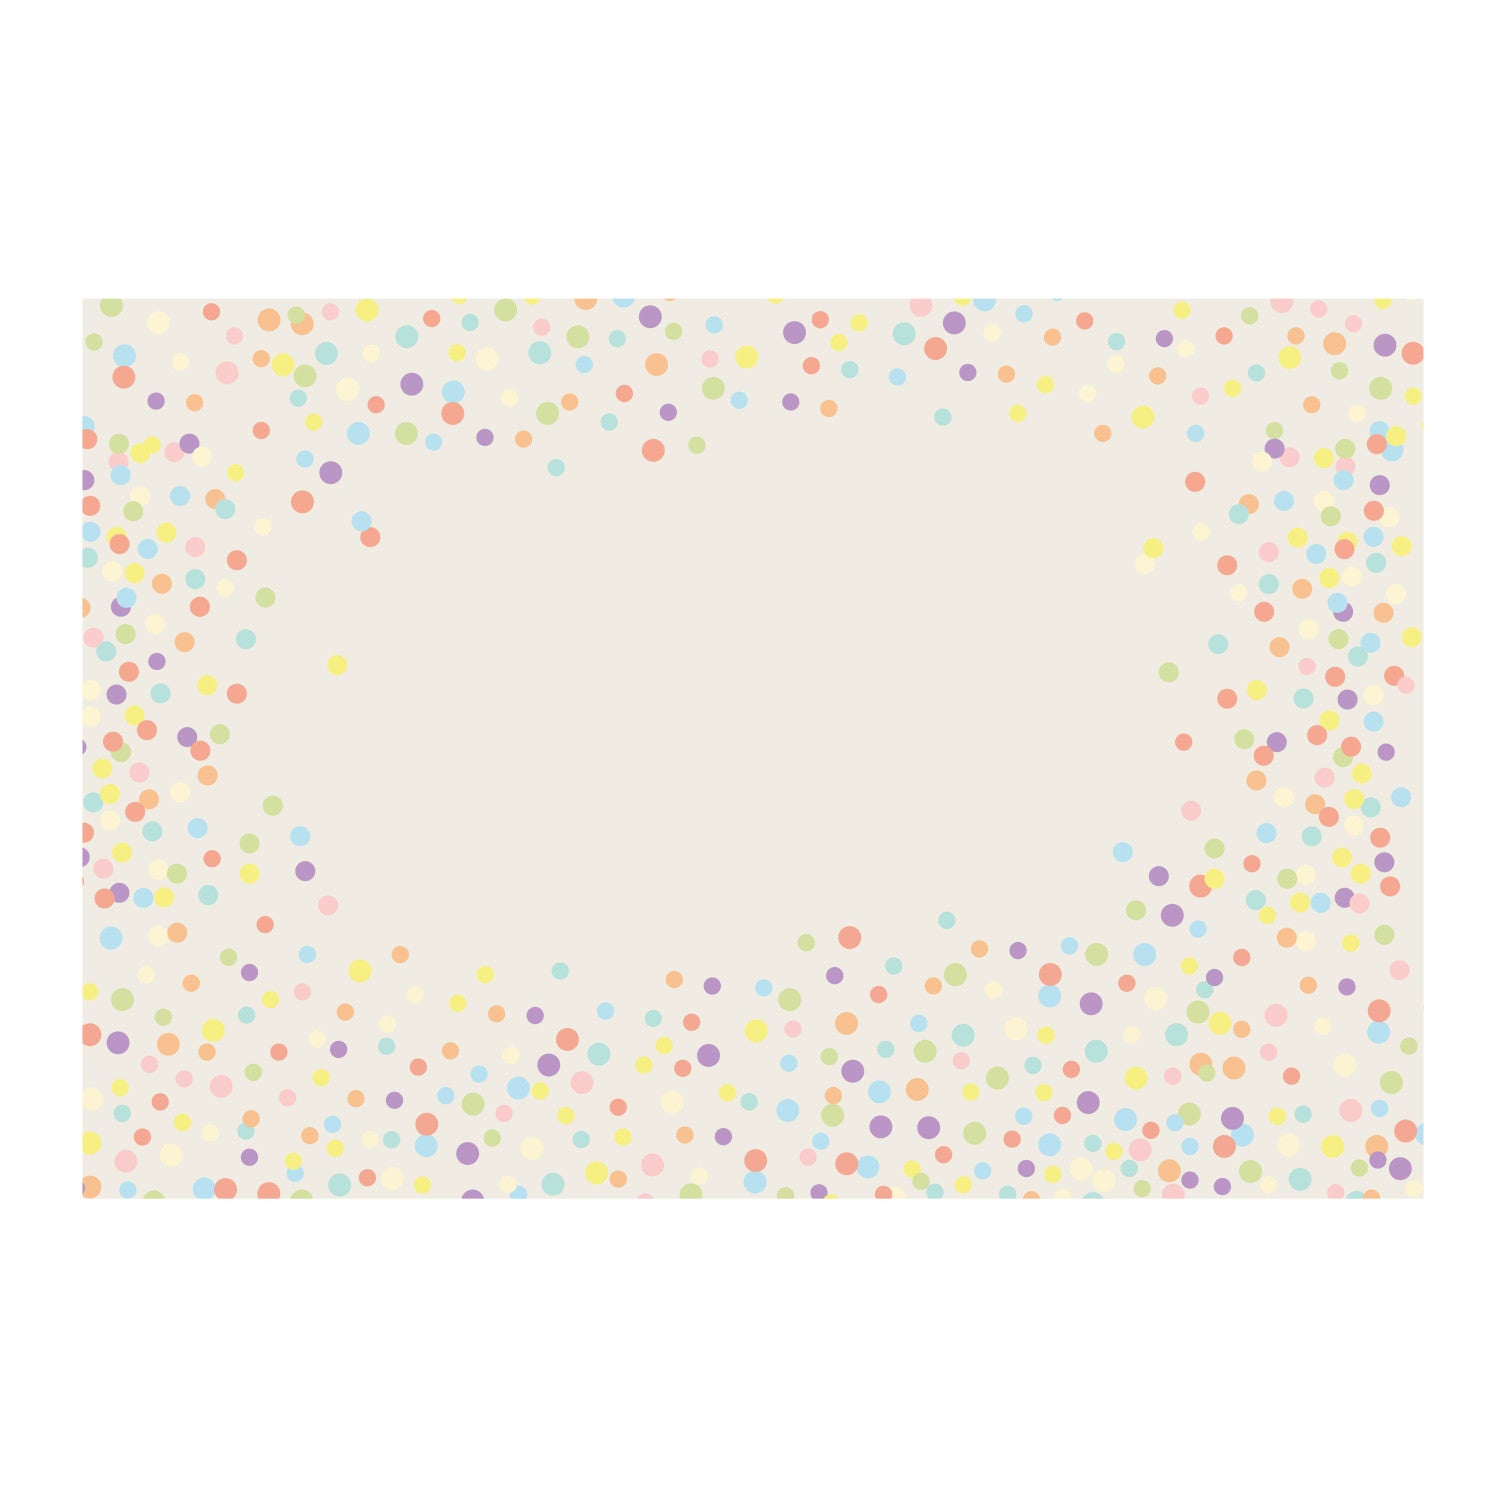 A cream paper placemat with multi color confetti dots scattered around the perimeter of placemat, with an open space in the middle for a personalized message.